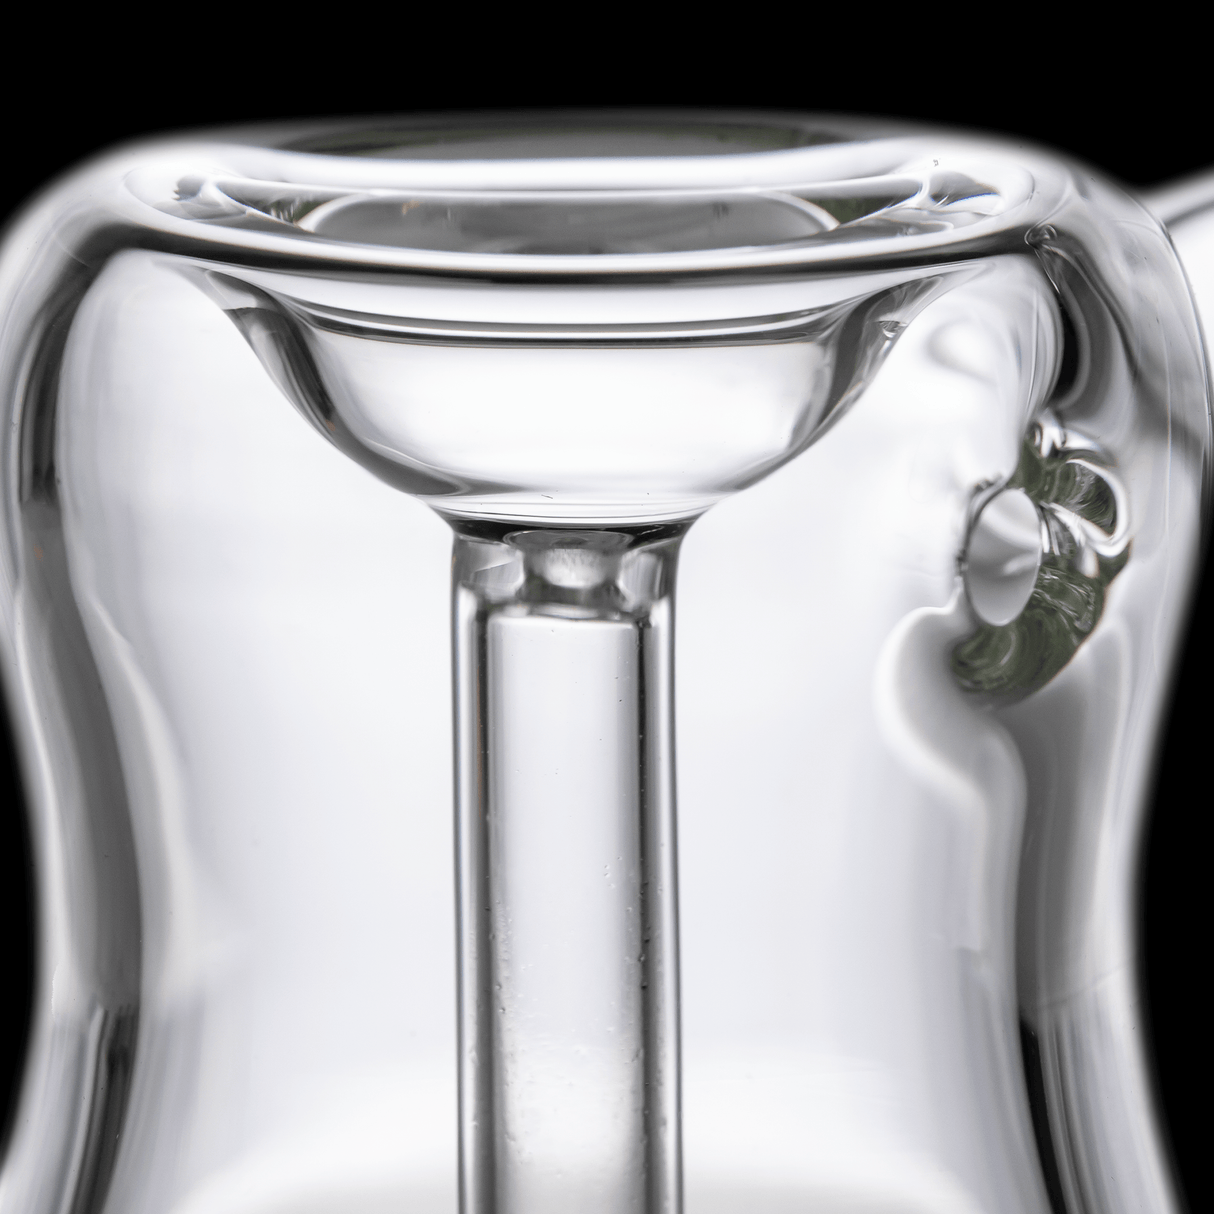 MJ Arsenal Abyss Compact Bubbler - Sleek, Durable & Smooth Hits